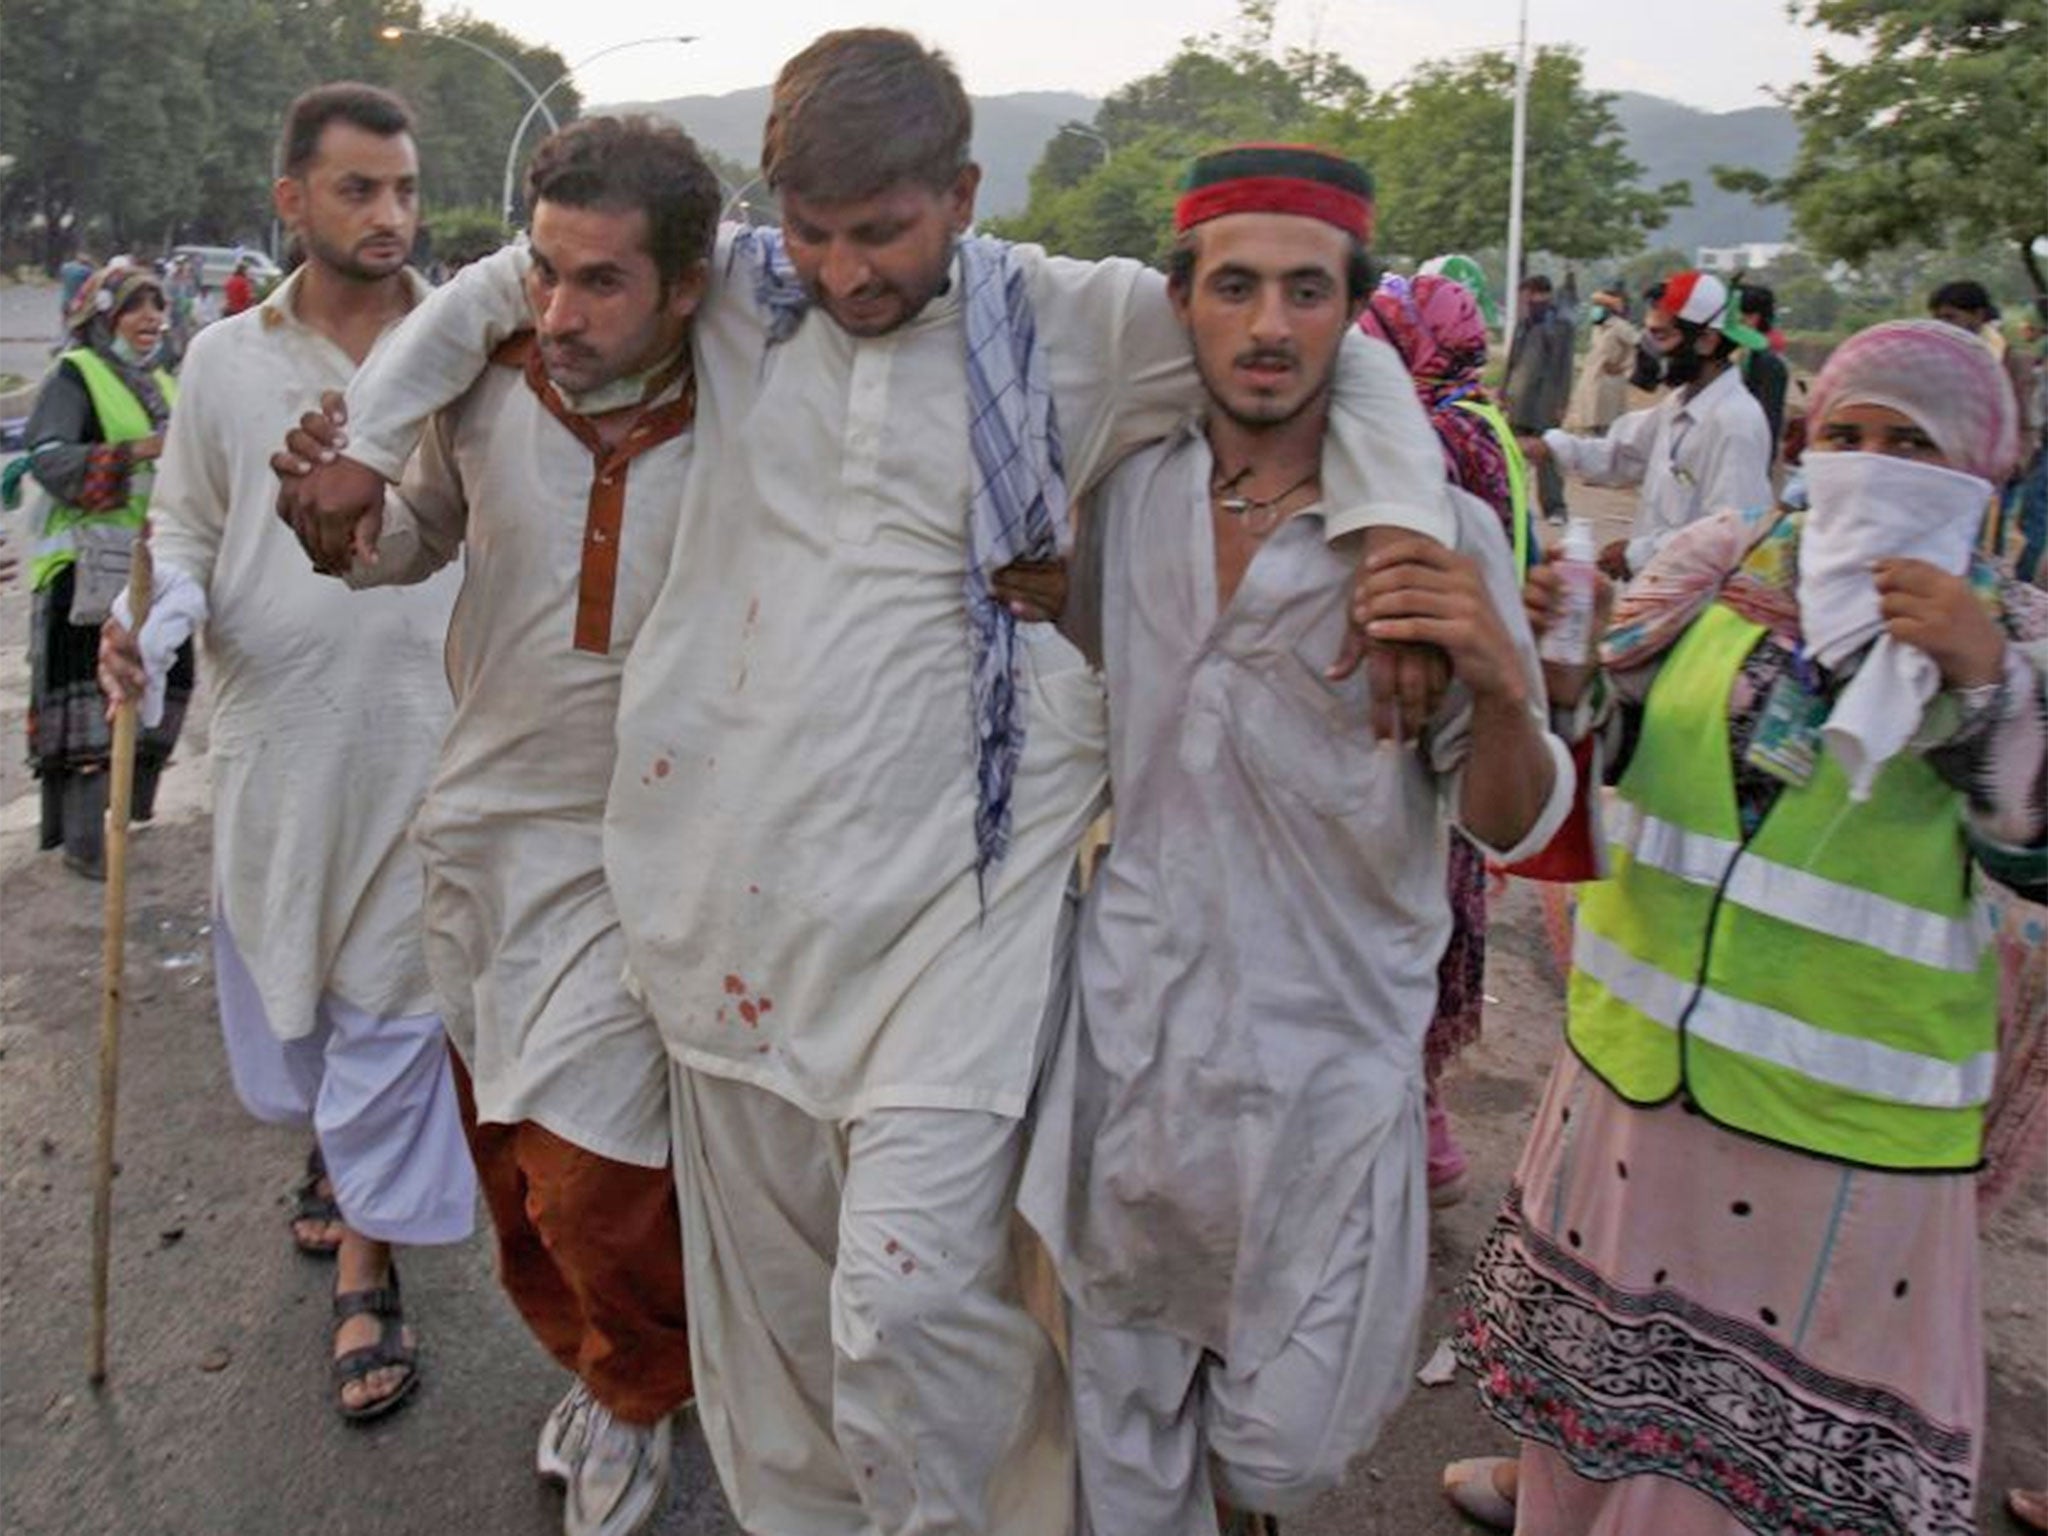 Pakistani protesters help carry their injured colleague to an ambulance during a clashes near prime minister's home in Islamabad, Pakistan